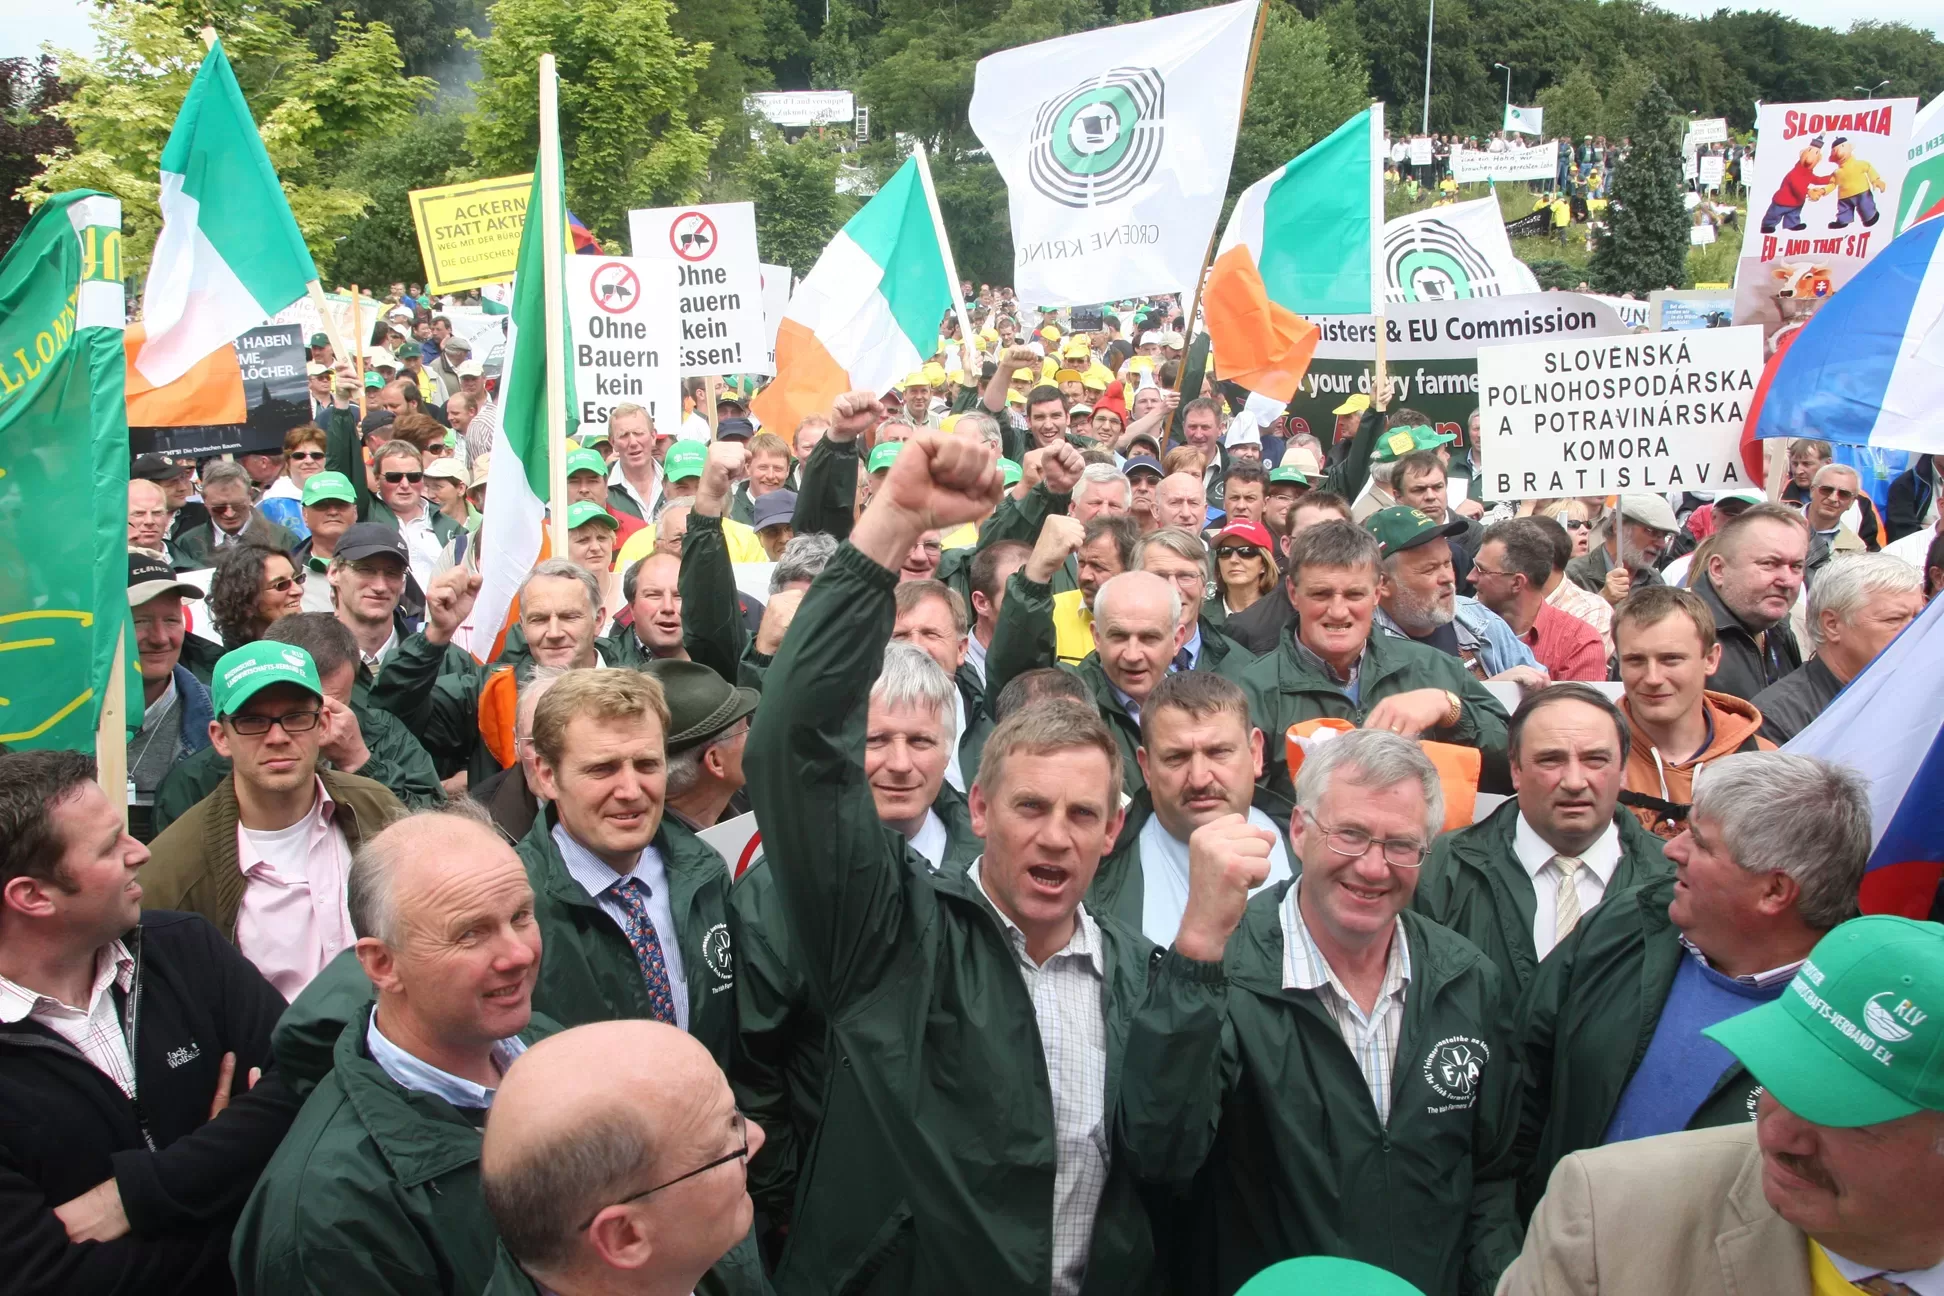 Irish farmers protesting and ready for spilled milk